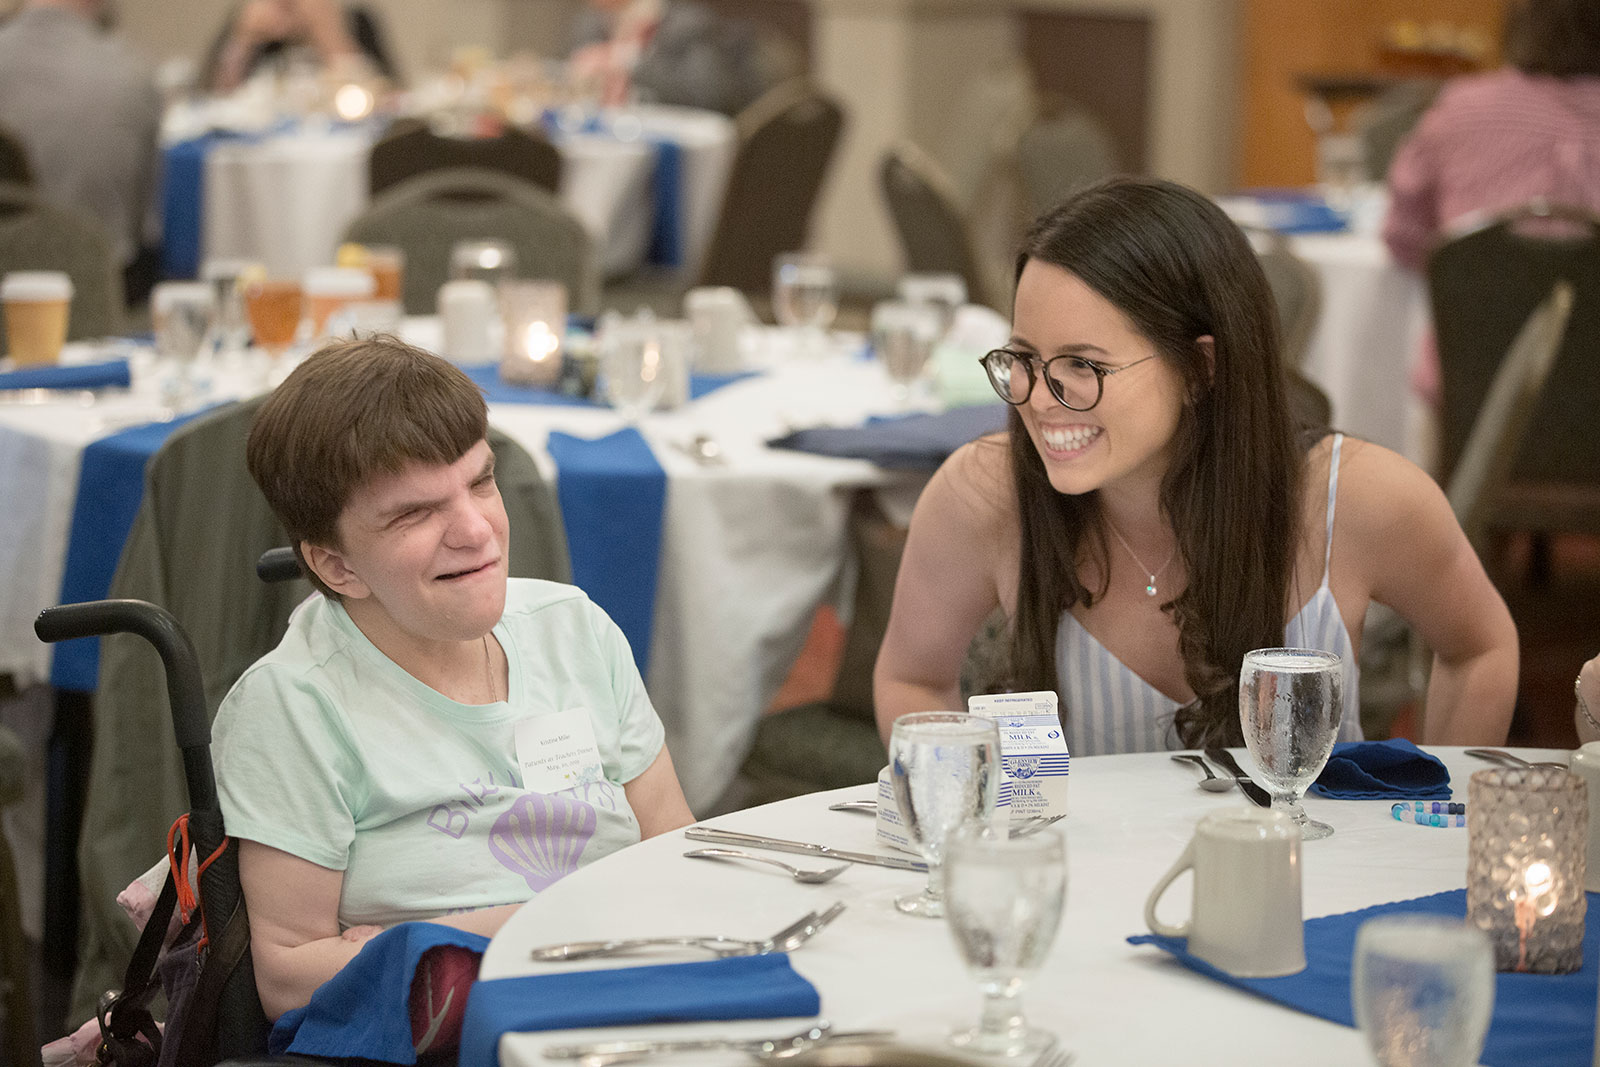 A young woman is seen talking happily with a woman in a wheelchair sitting at a table with her.